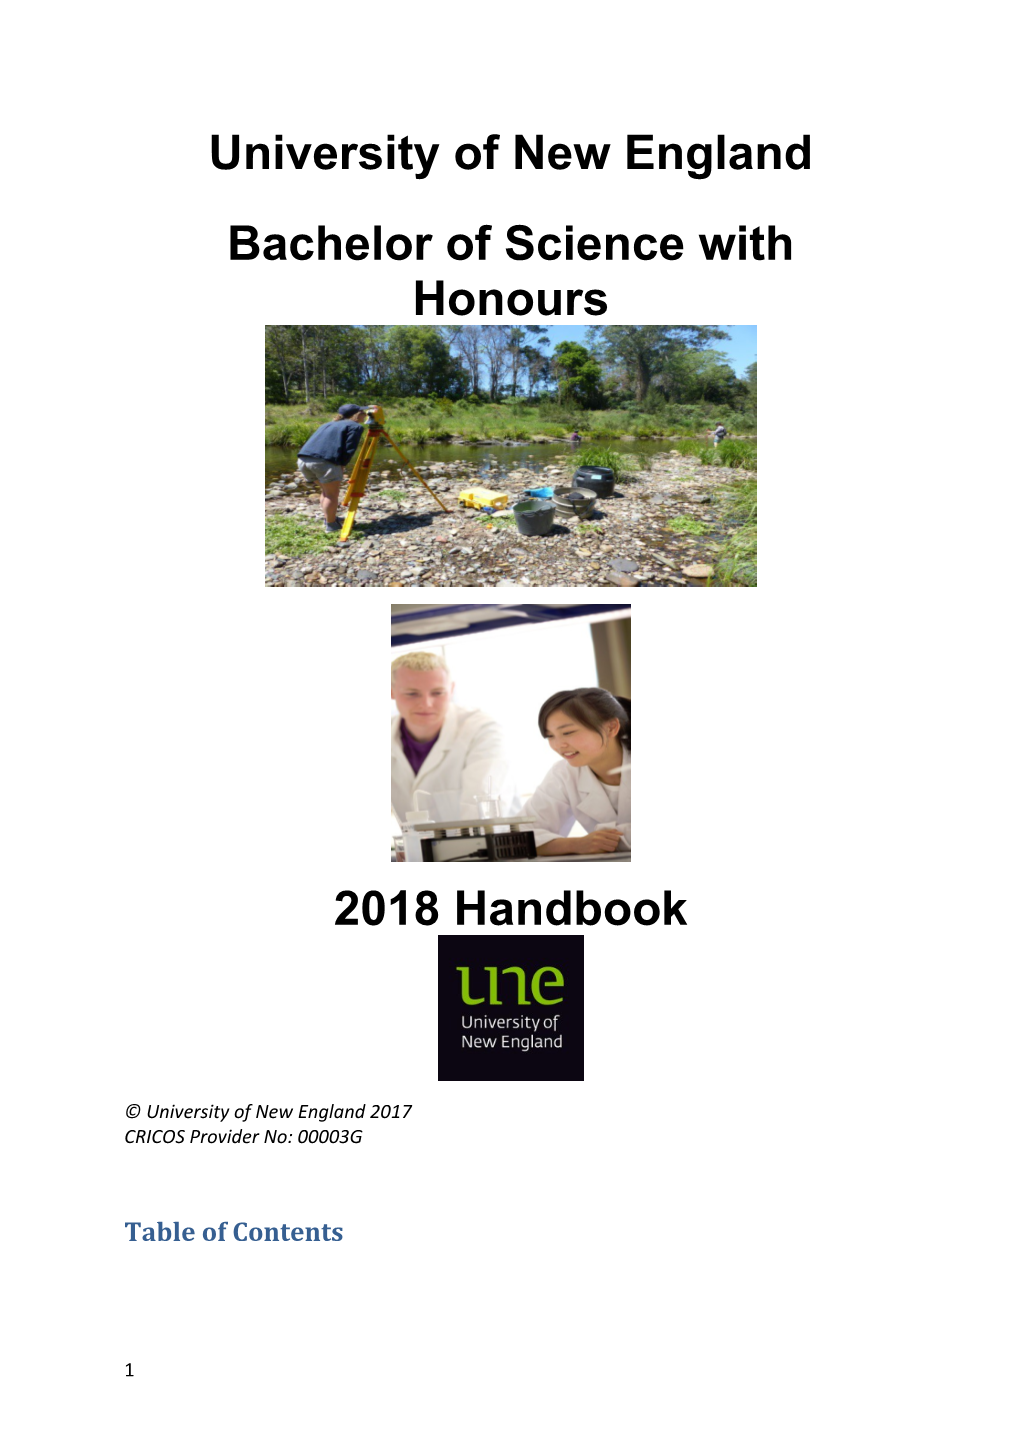 Bachelor of Science with Honours